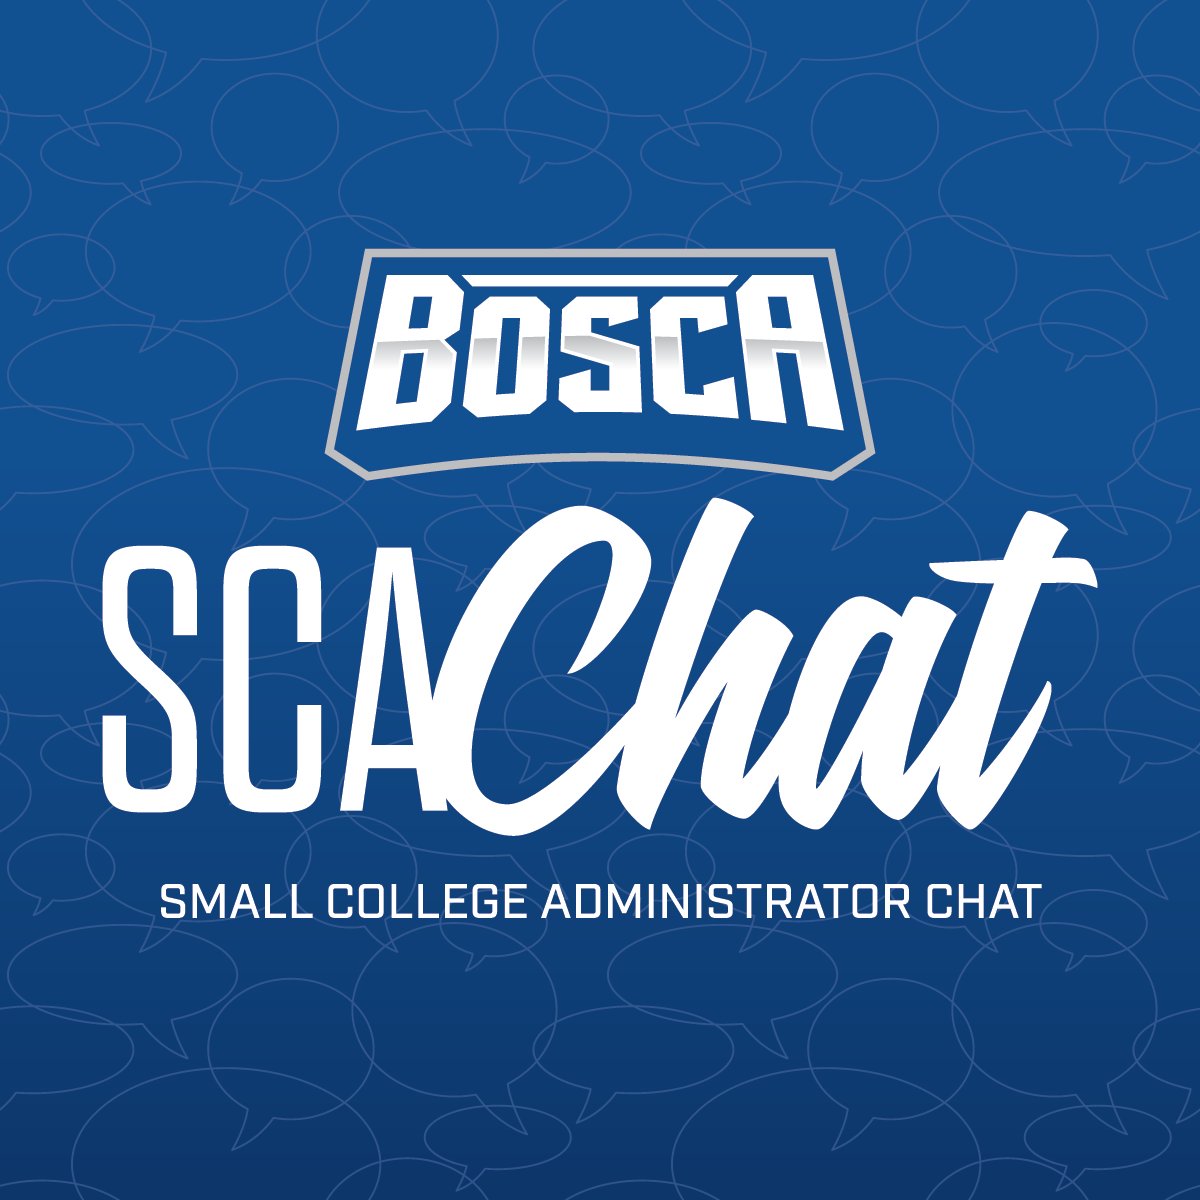 Join us for the last Small College Administrators virtual chat of the semester this Sunday night at 7pm CST. Opportunity to network and exchange ideas with administrators from around the country. Email jim@smallcollegeathletics.com for registration information